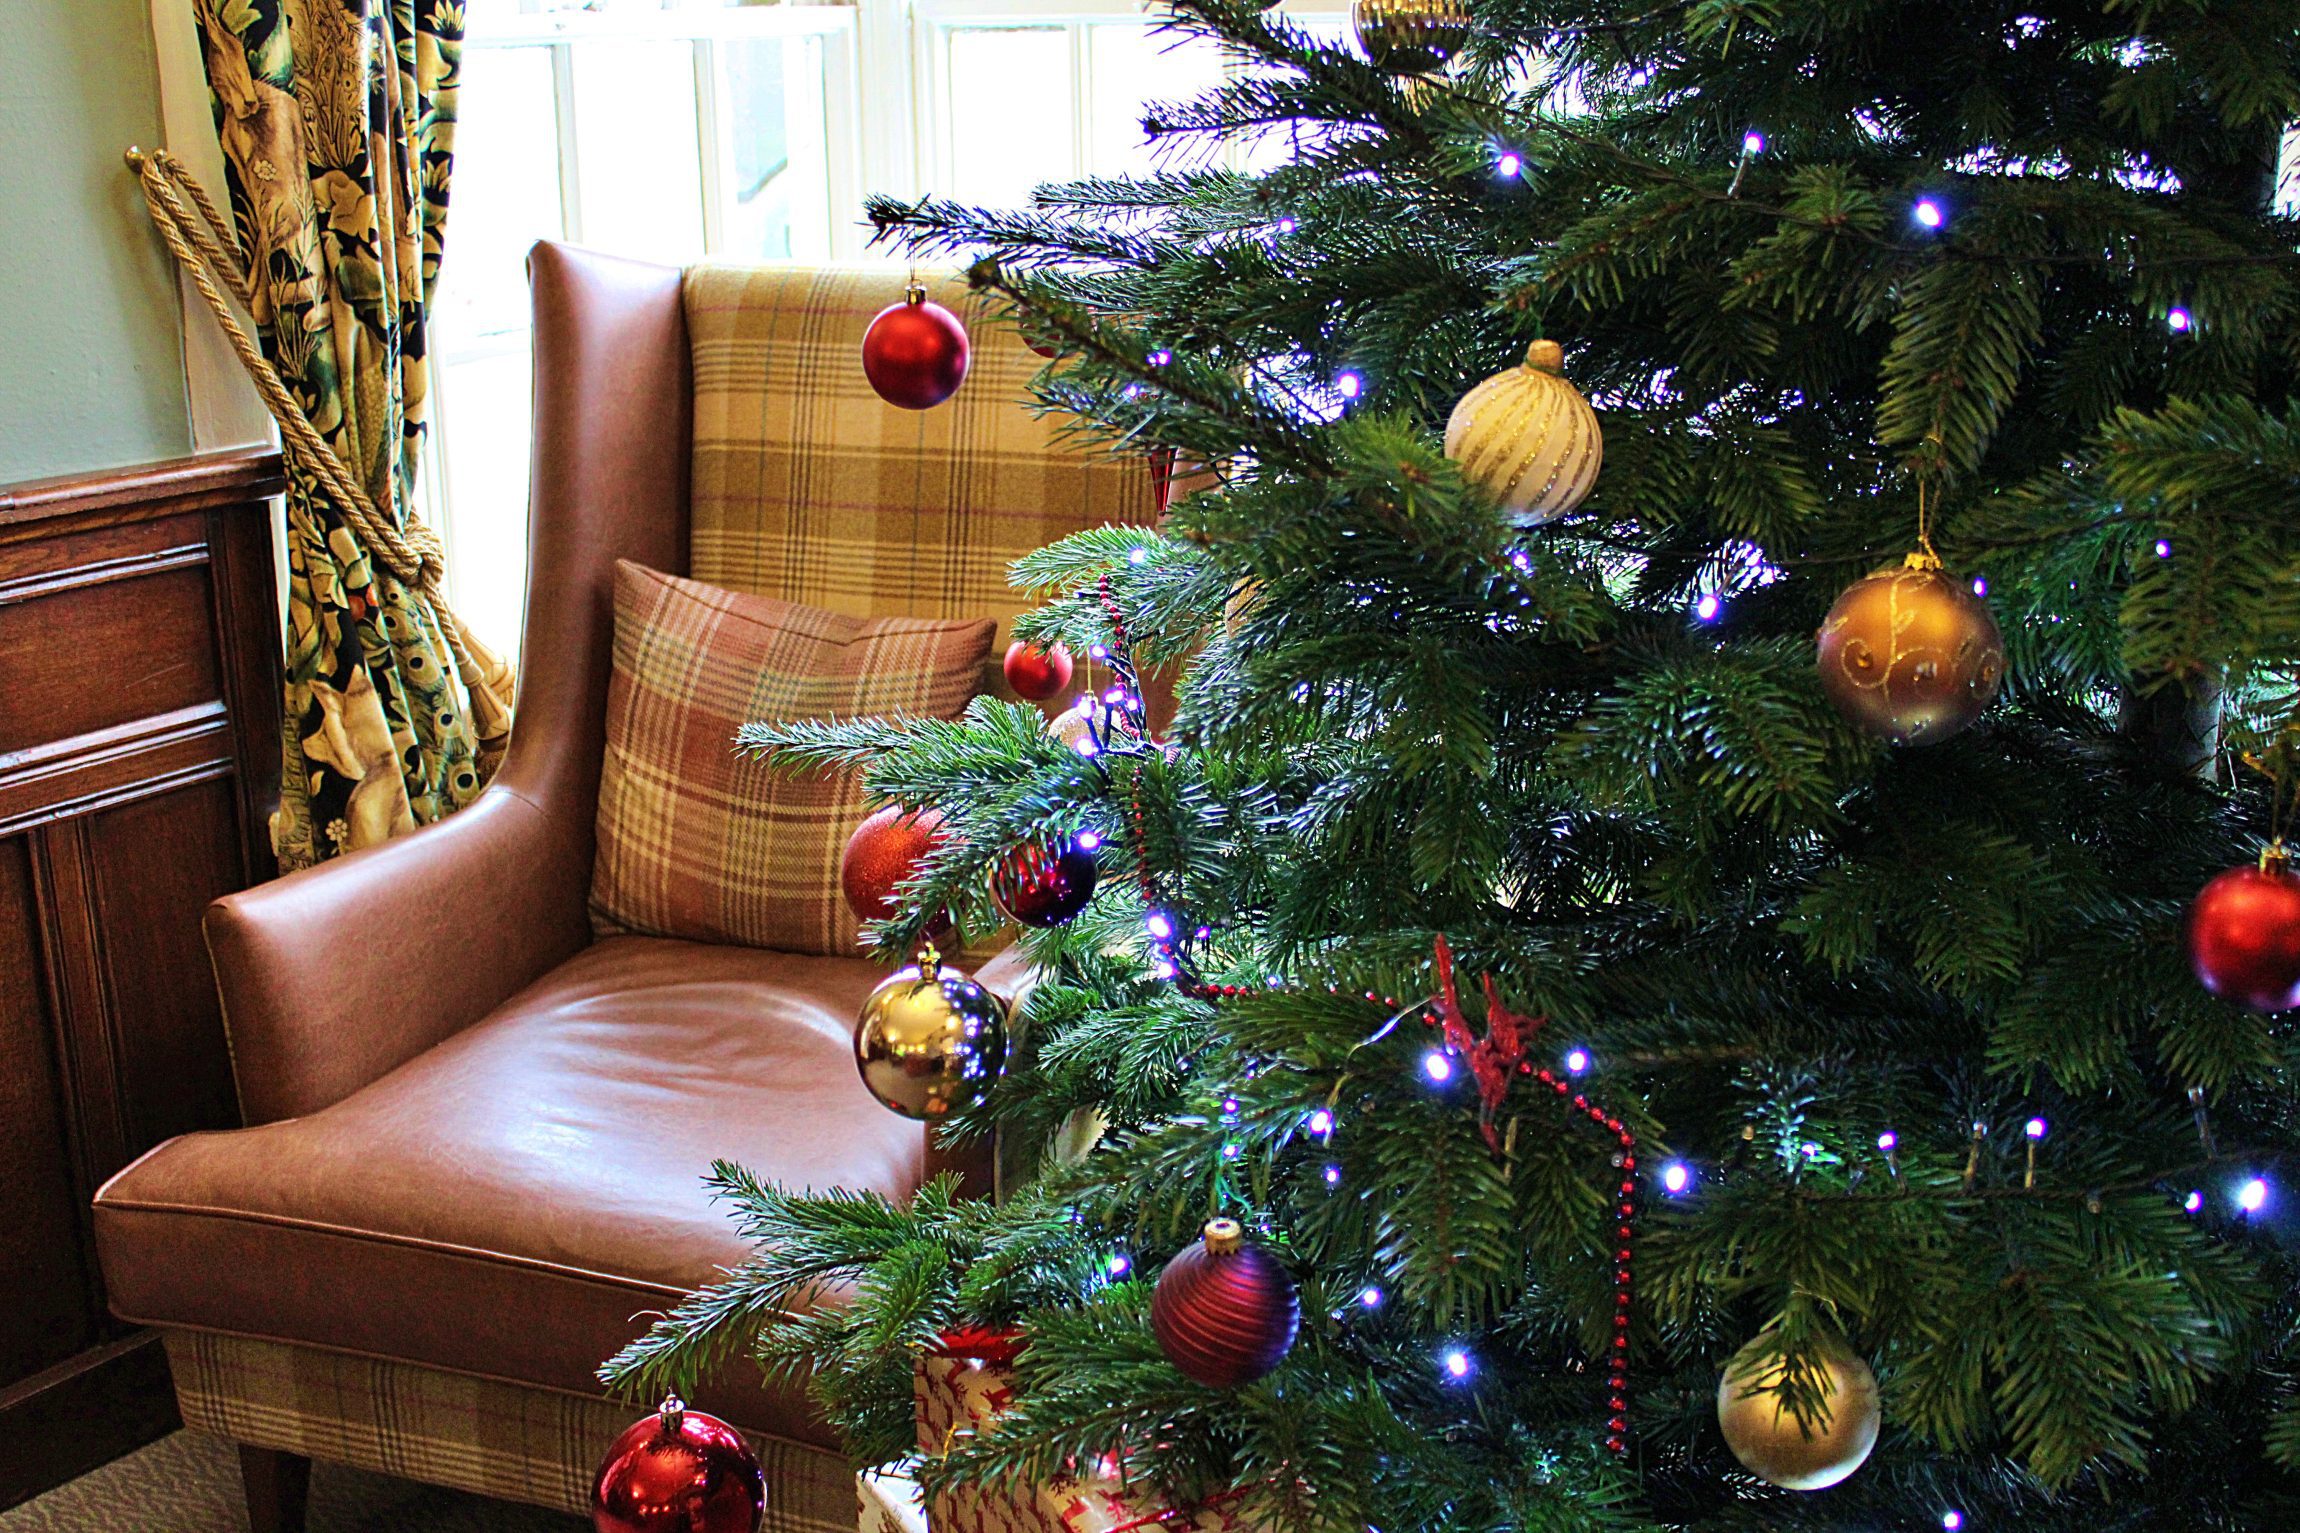 Christmas stay - forest of cdean christmas - hotel stay for christmas - speech house hotel